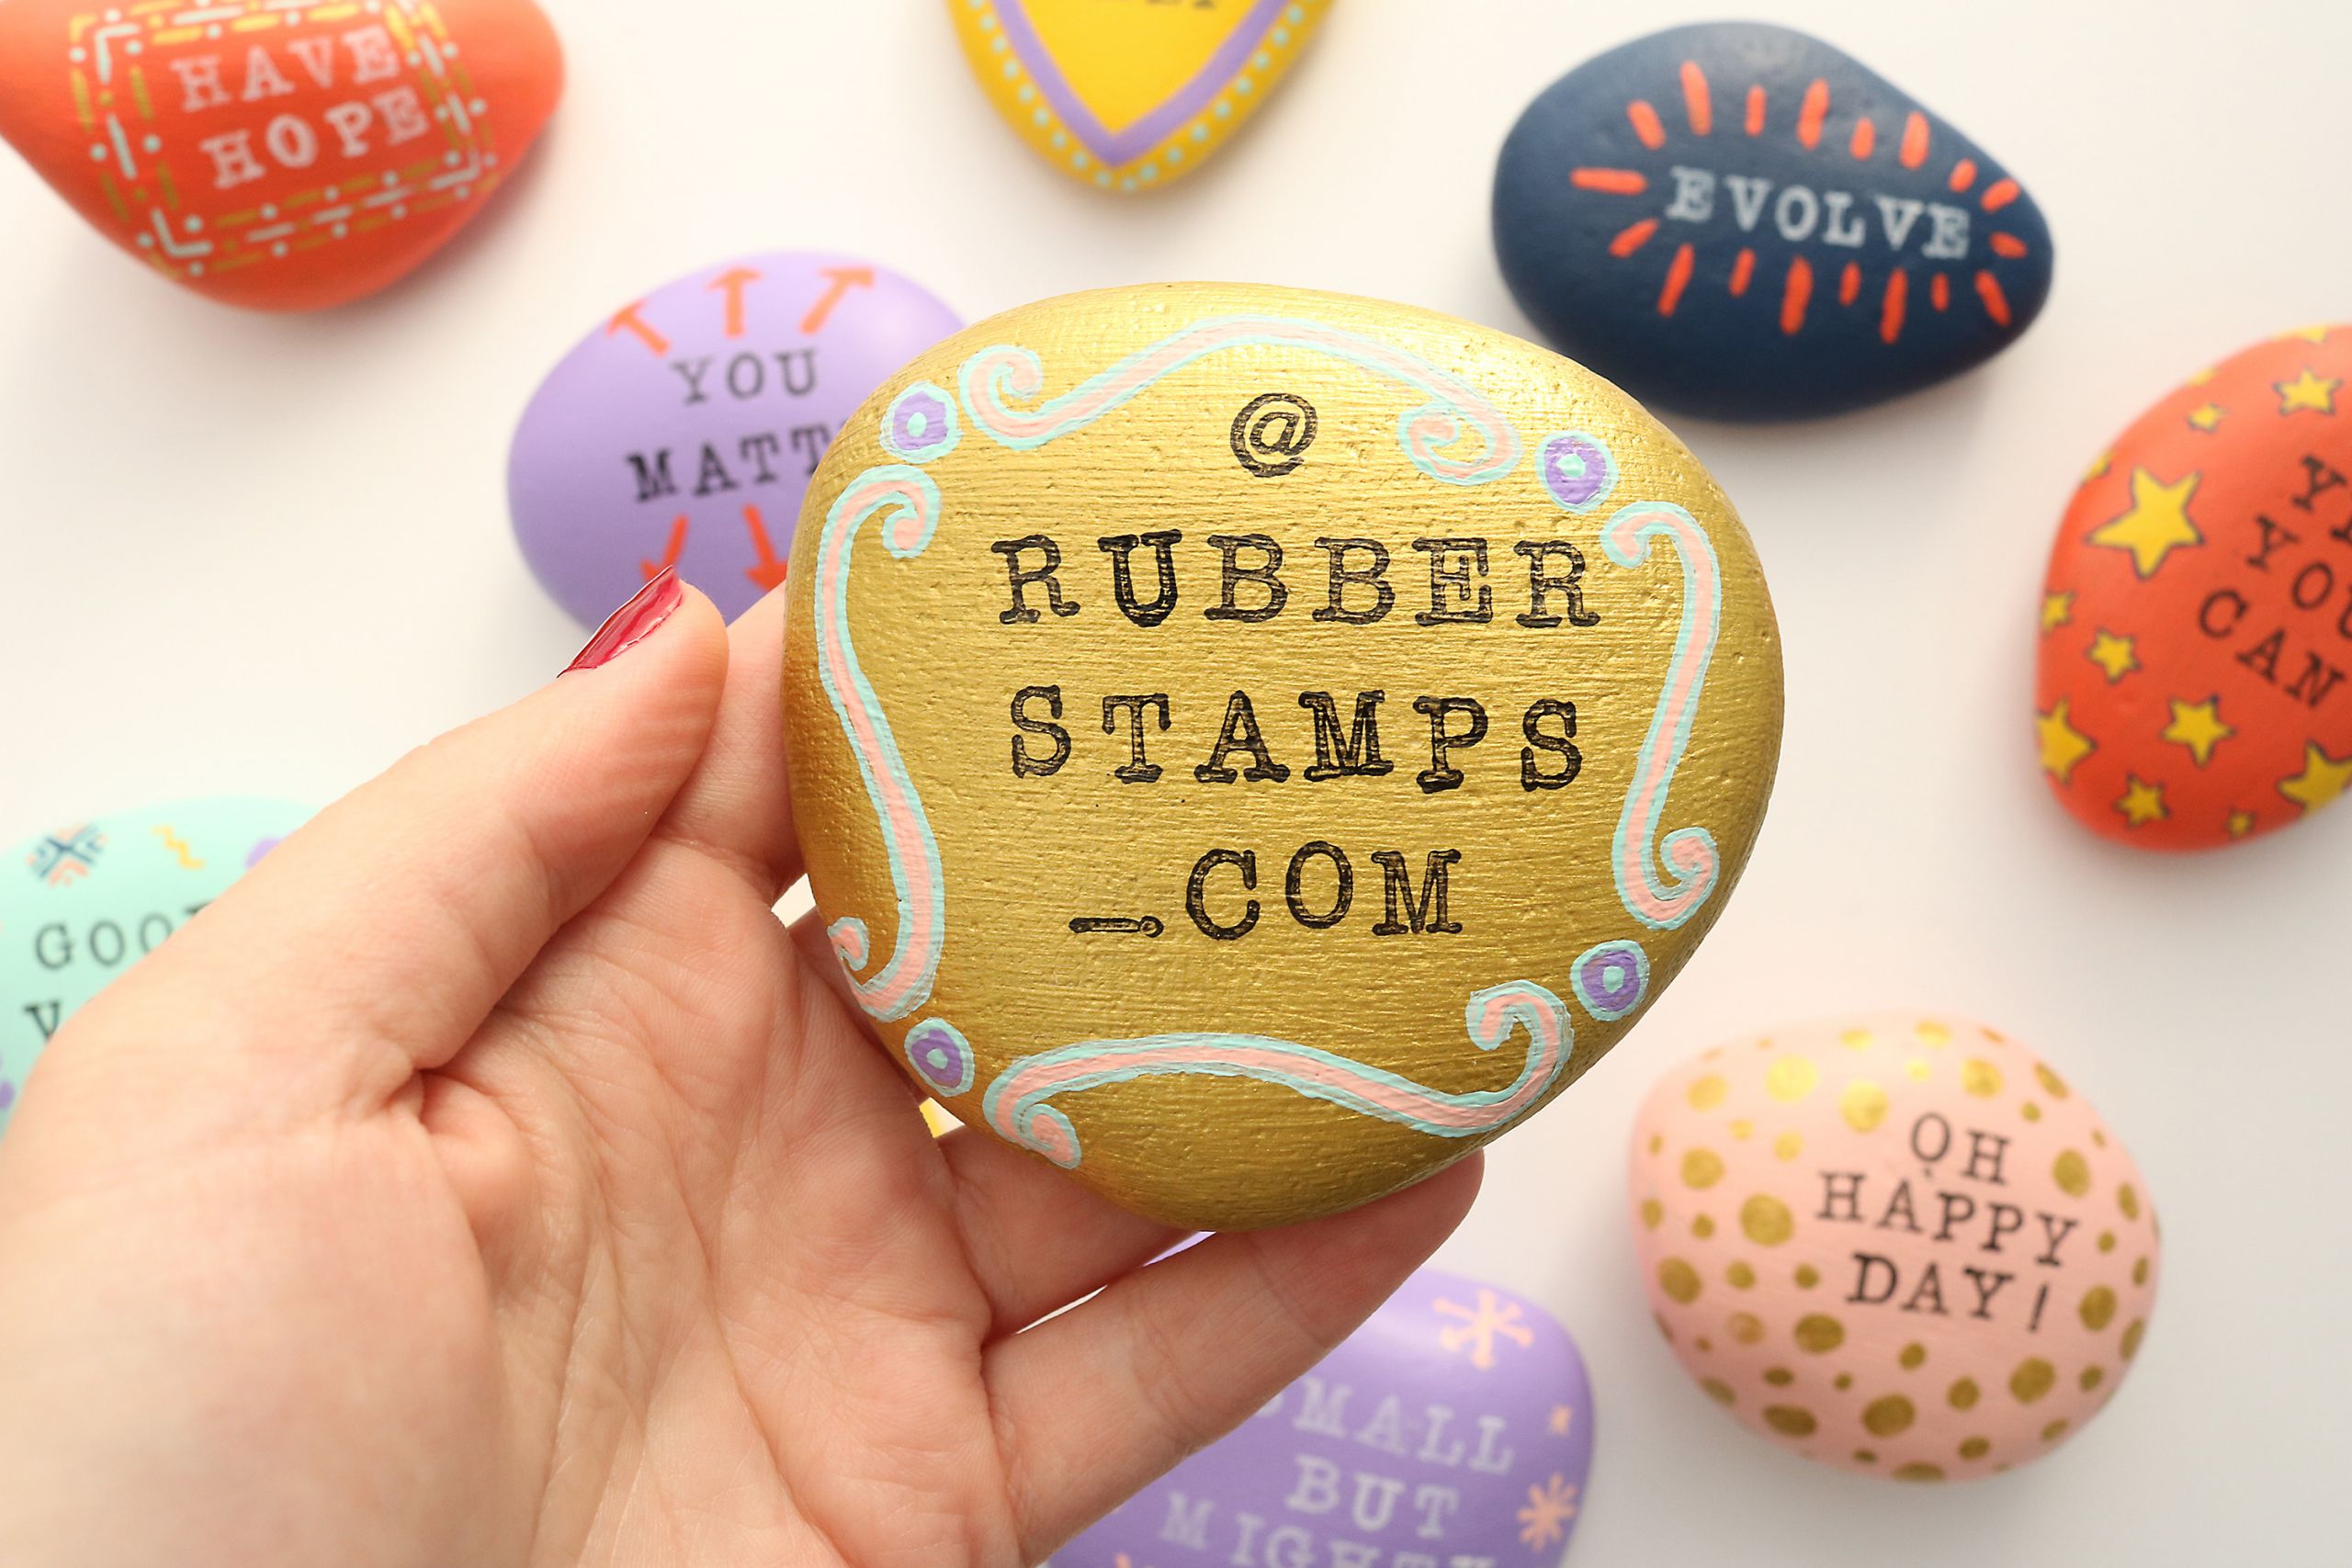 Kindness Rocks Quotes
 The Kindness Rocks Project RubberStamps Blog